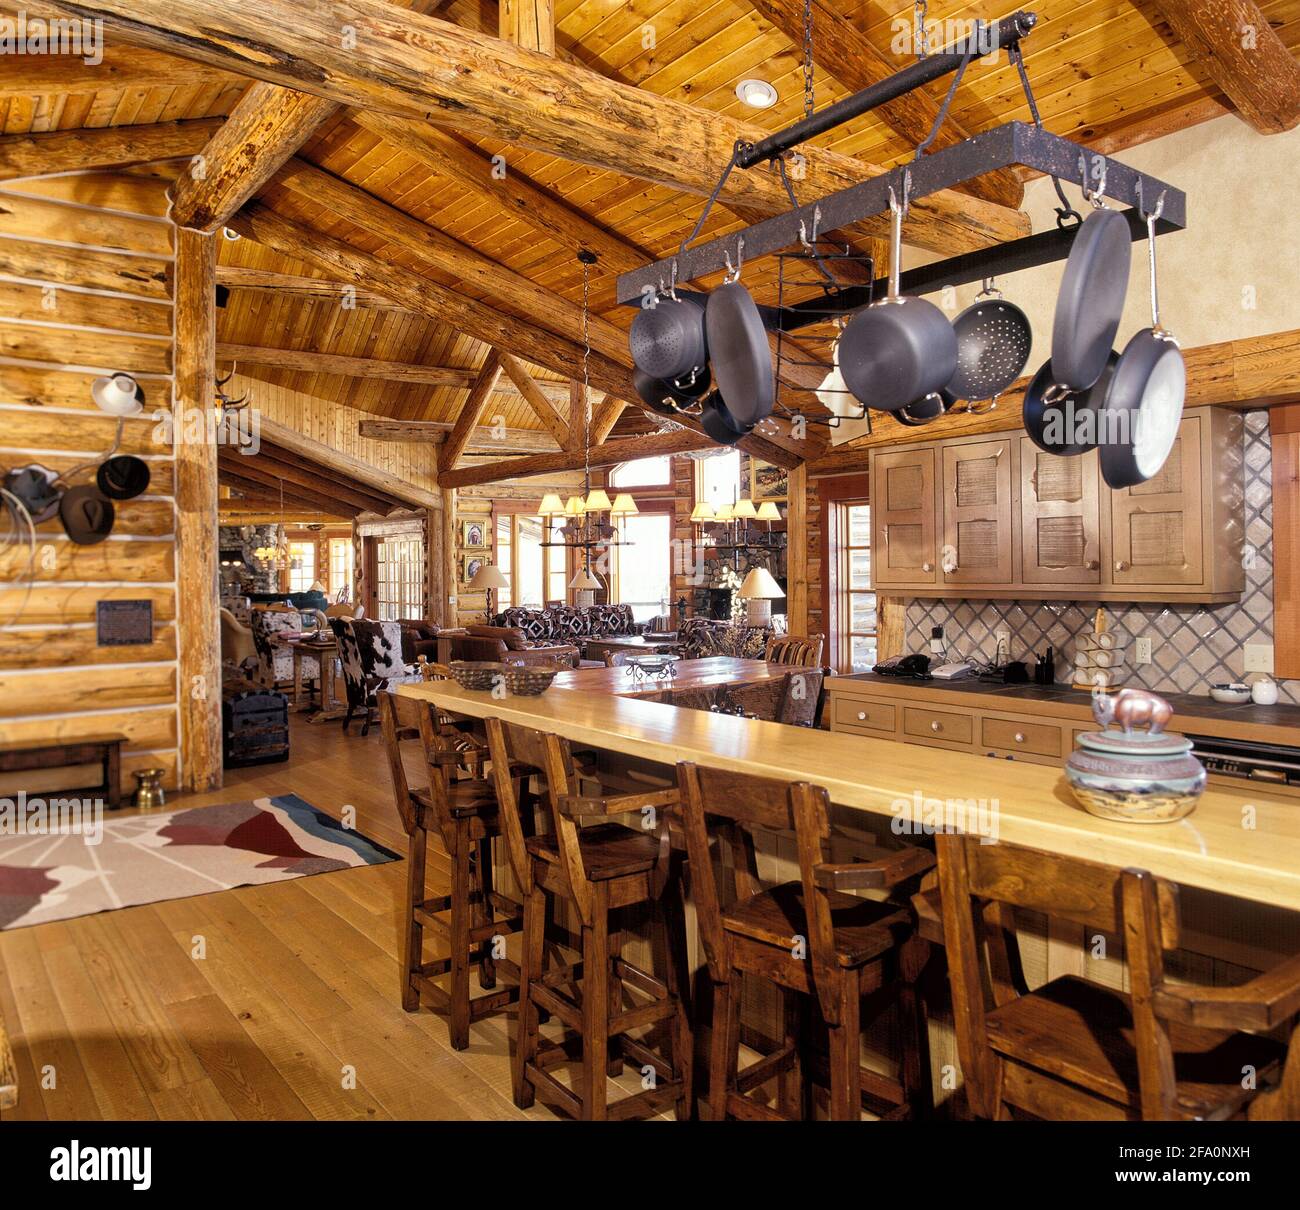 The kitchen with bar counter, pot rack, and rustic cabinetry, in a modern log cabin in the mountains Stock Photo